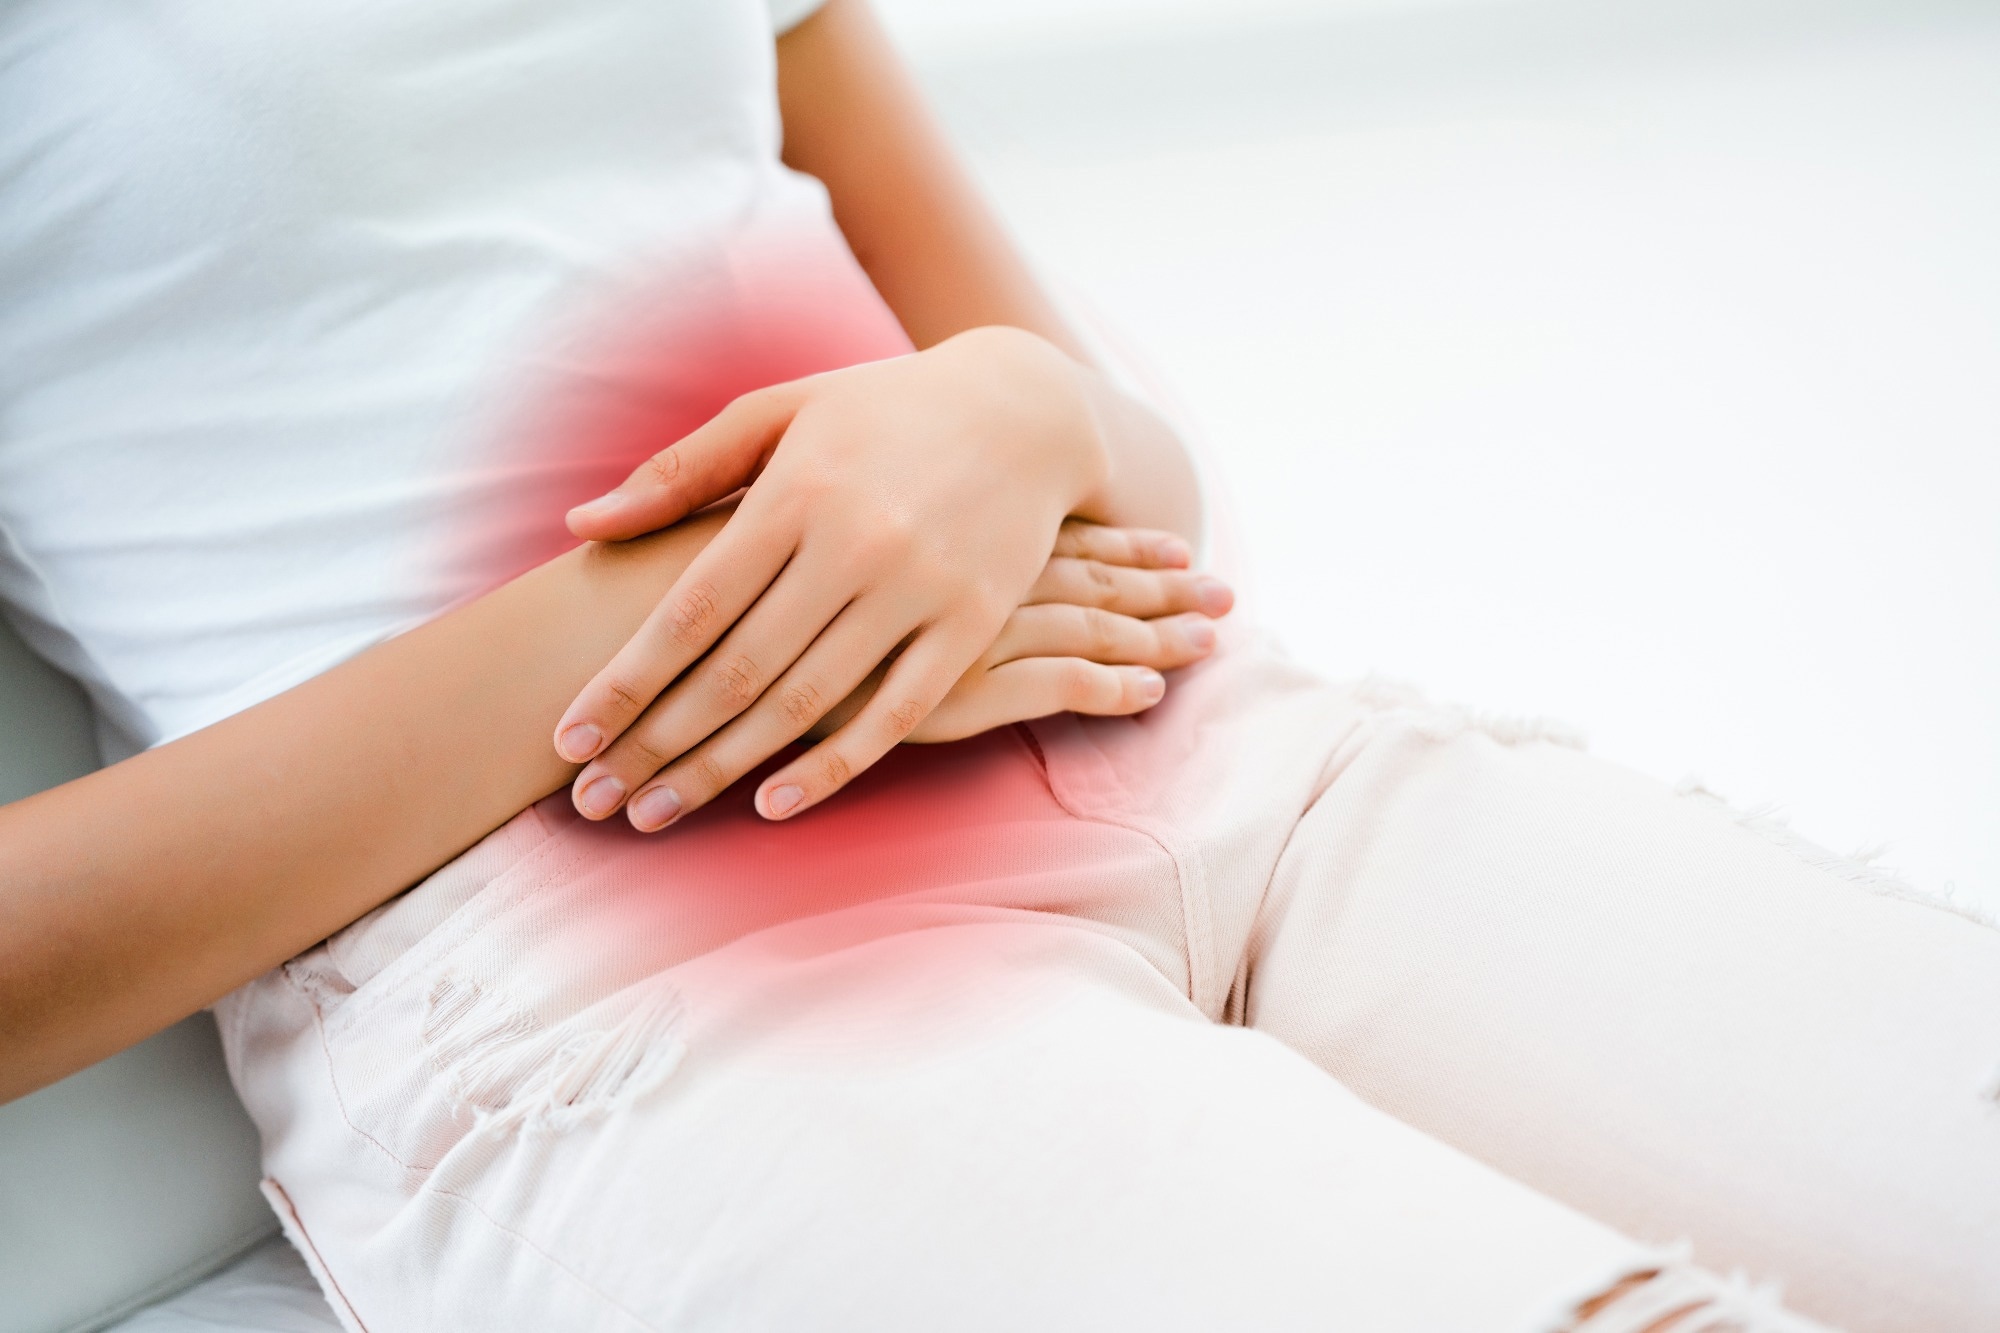 Study: Cannabis and Endometriosis: The Roles of the Gut Microbiota and the Endocannabinoid System. Image Credit: Rapeepat Pornsipak / Shutterstock